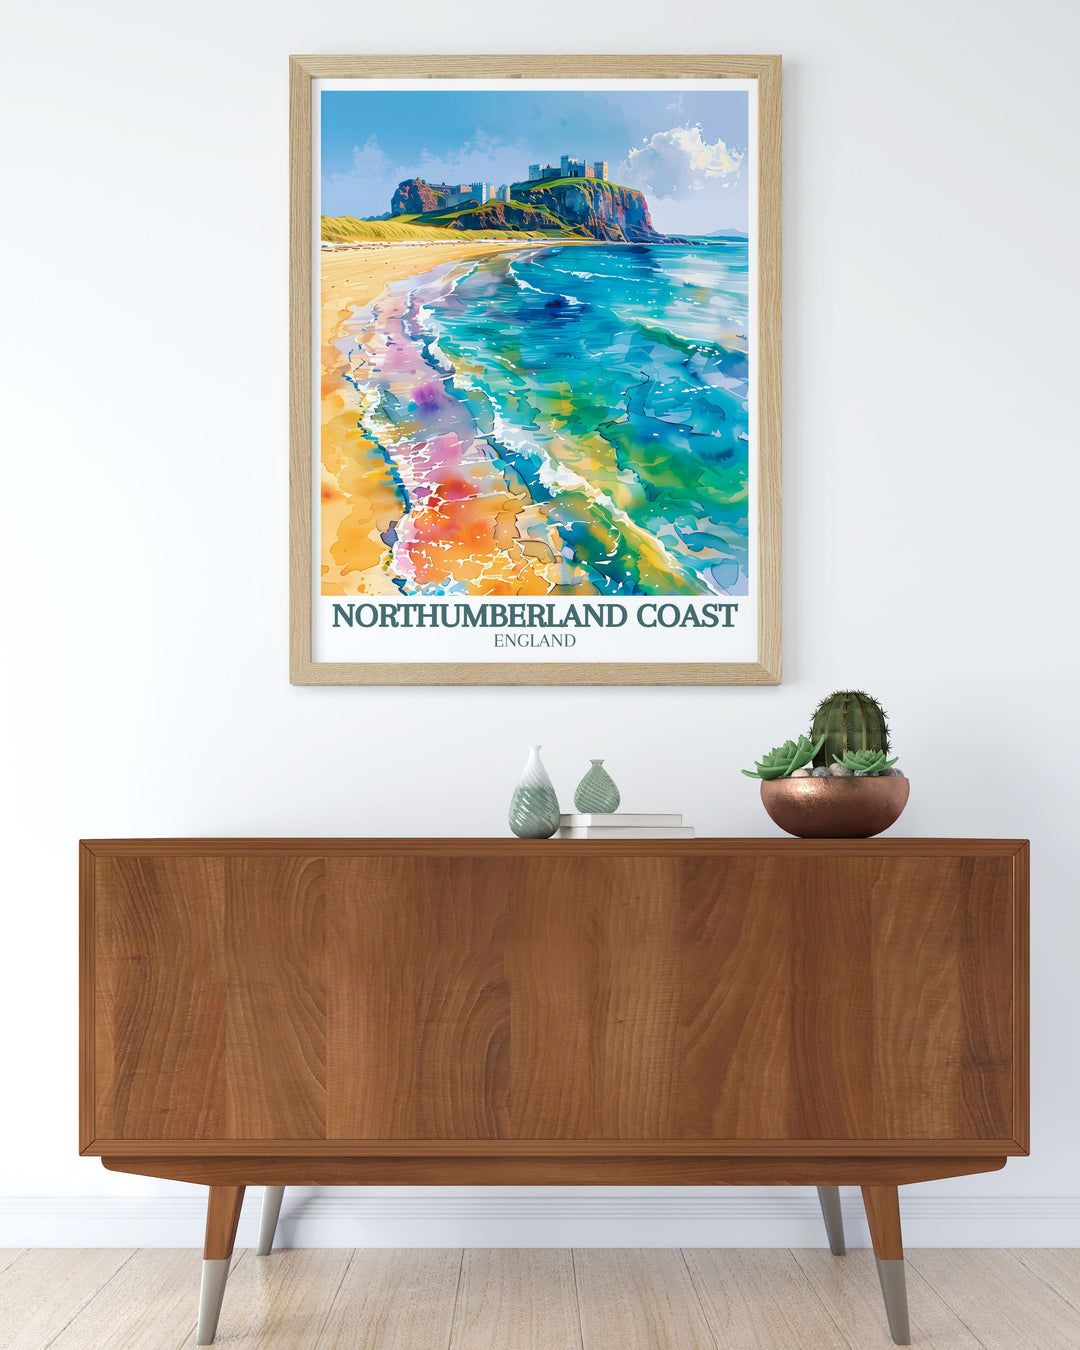 Retro Railway Print depicting Bamburgh Castle and Dunstanburgh Castle capturing the nostalgic essence of Northumberlands past and the picturesque coastal landscapes perfect for vintage art collectors